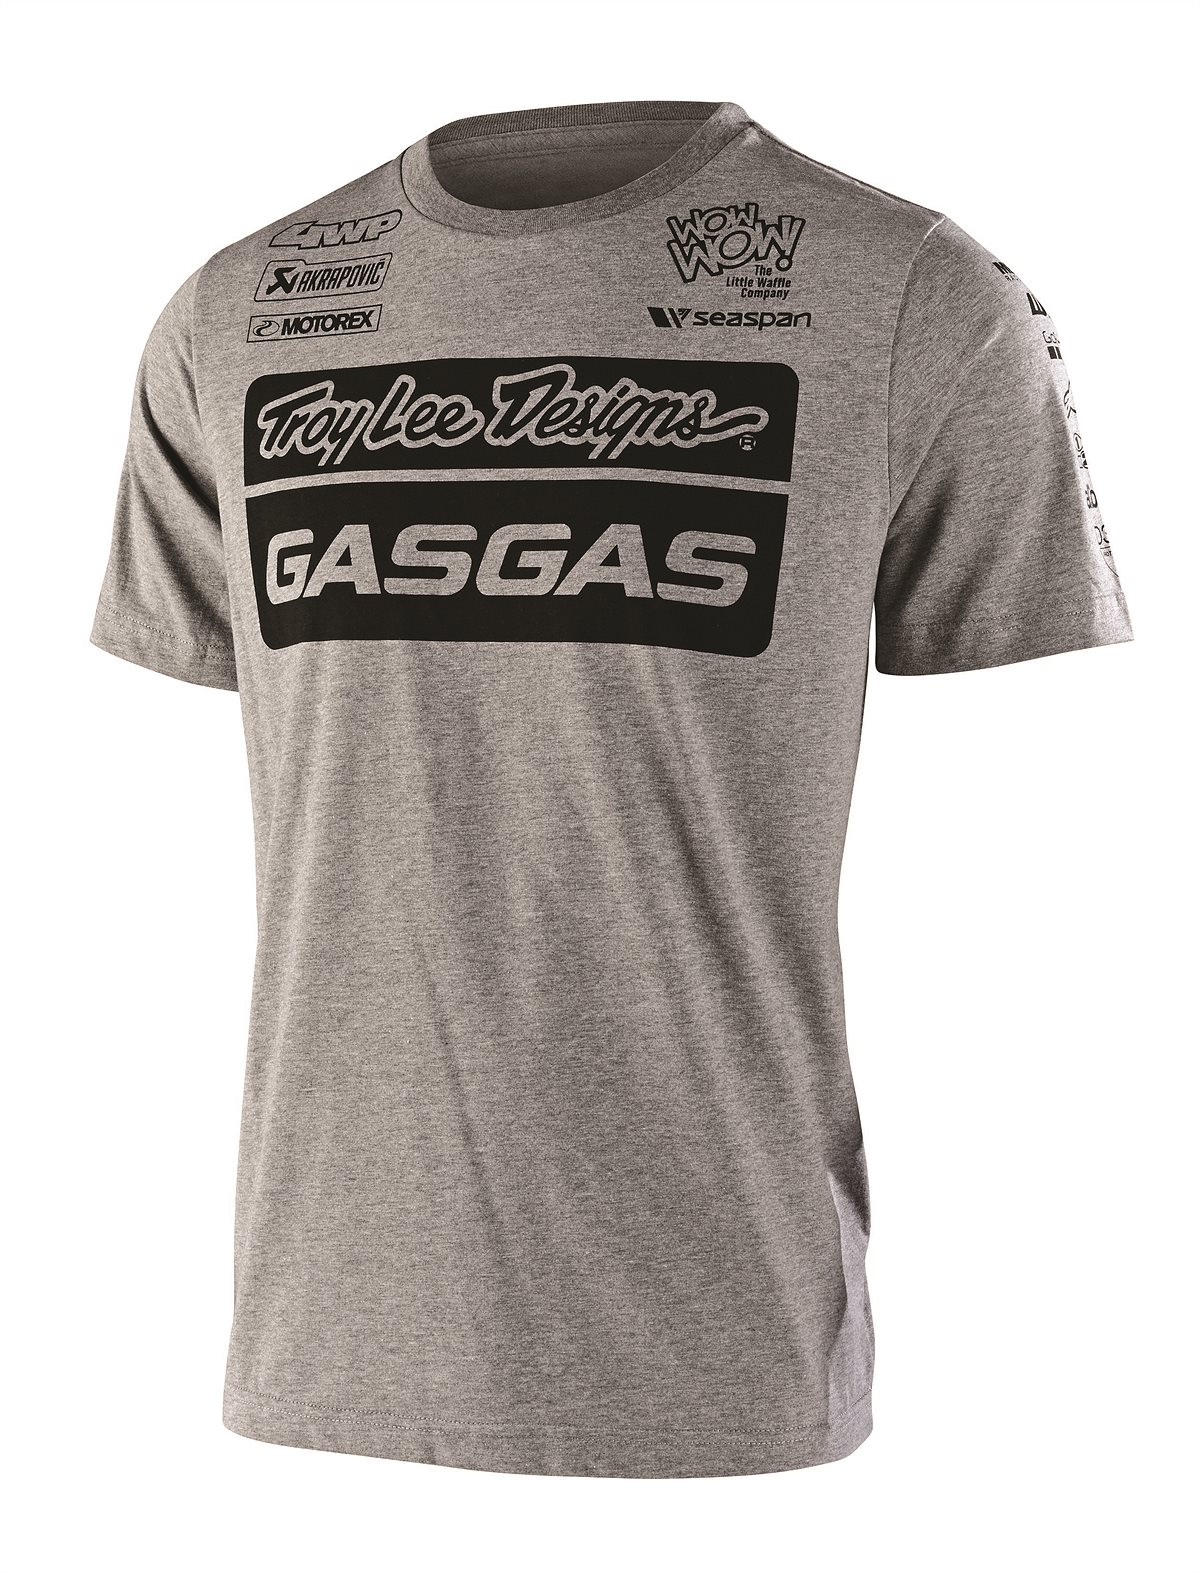 52842_3GG23005120X_TLD Team Tee Grey_front